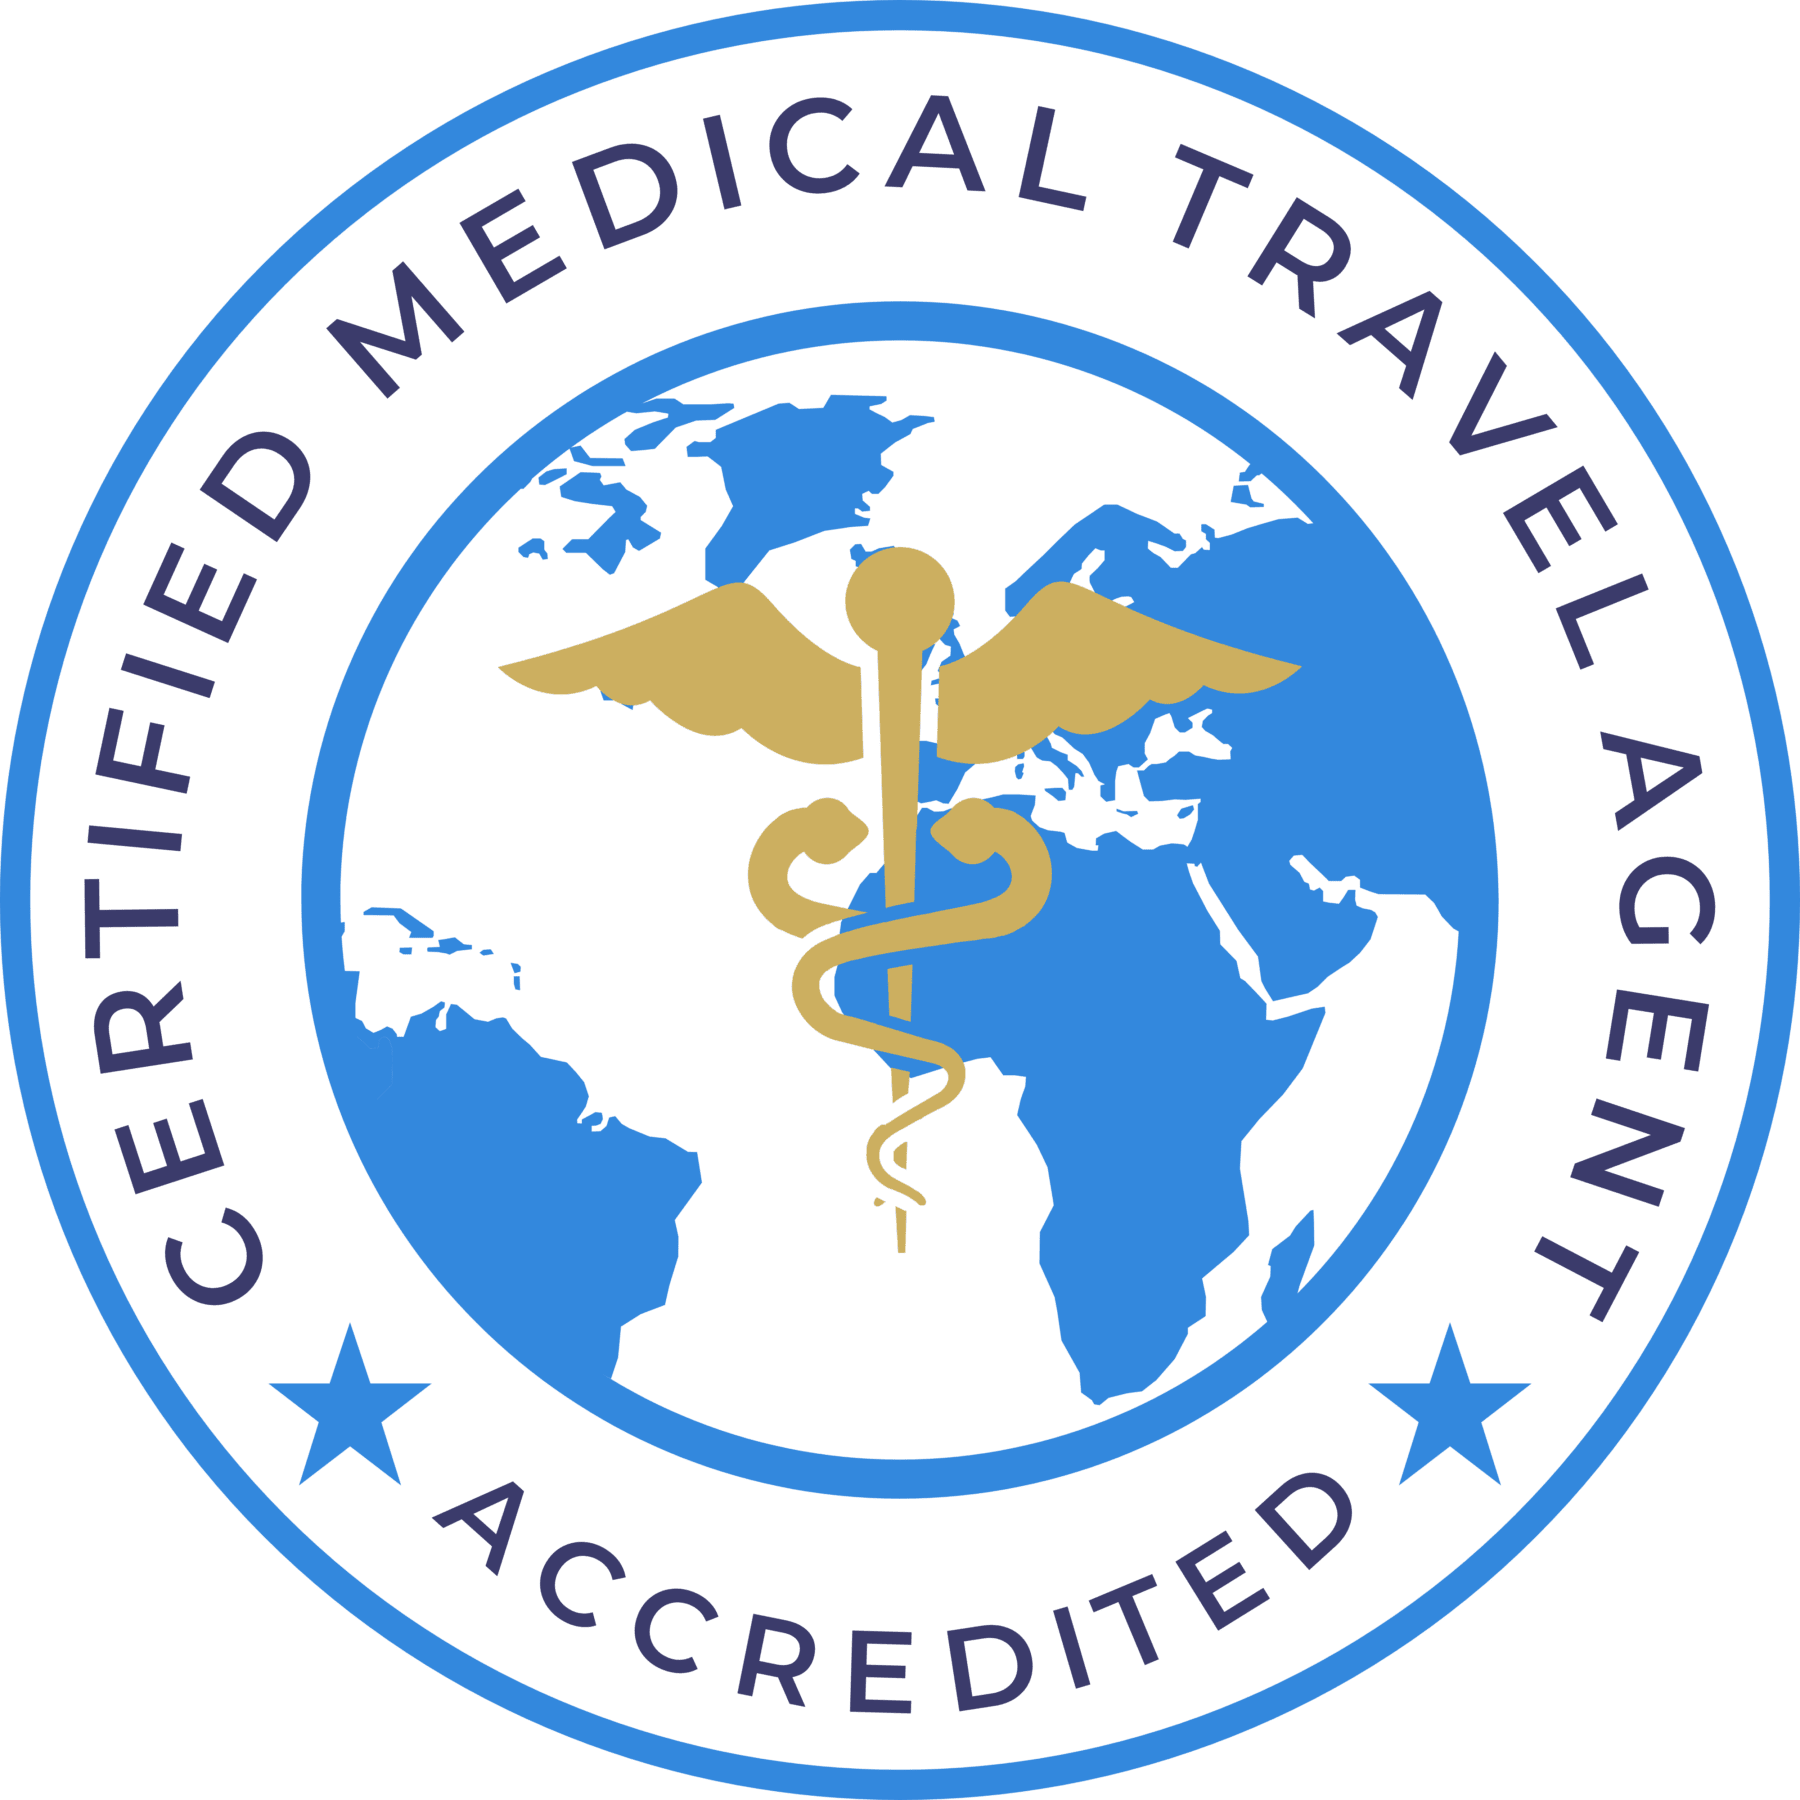 Certified Medical Travel Professional